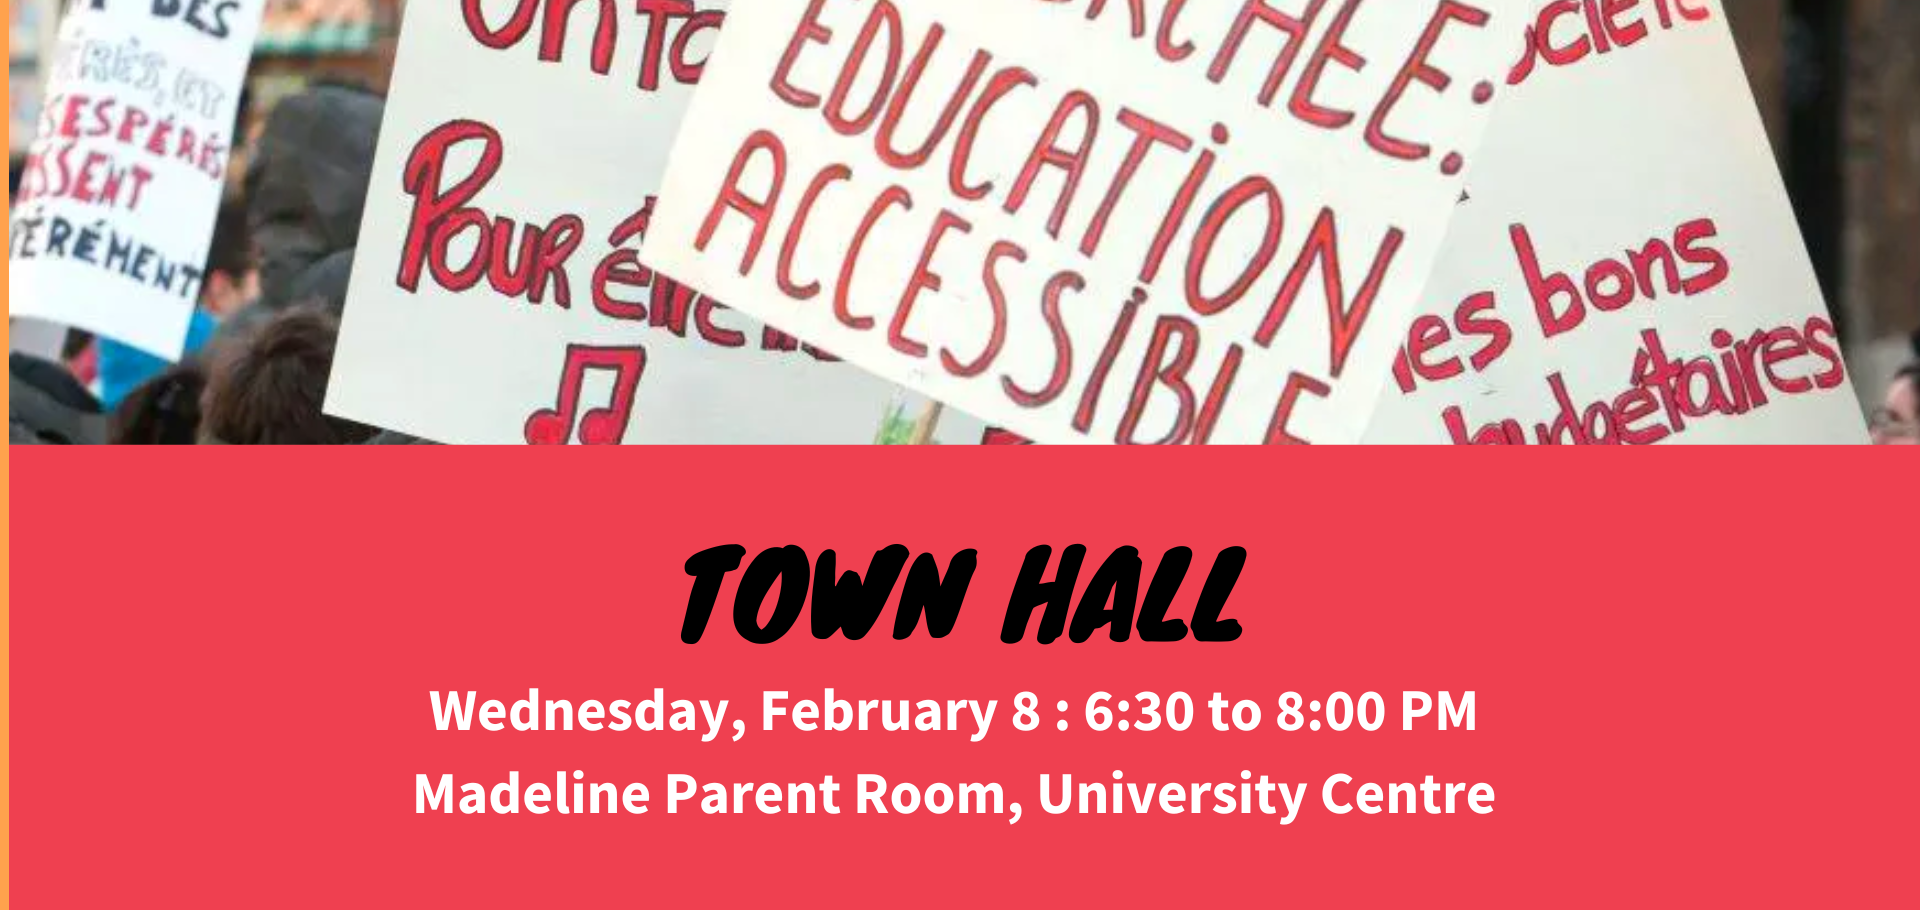 TOWN HALL FOR ACCESSIBLE EDUCATION